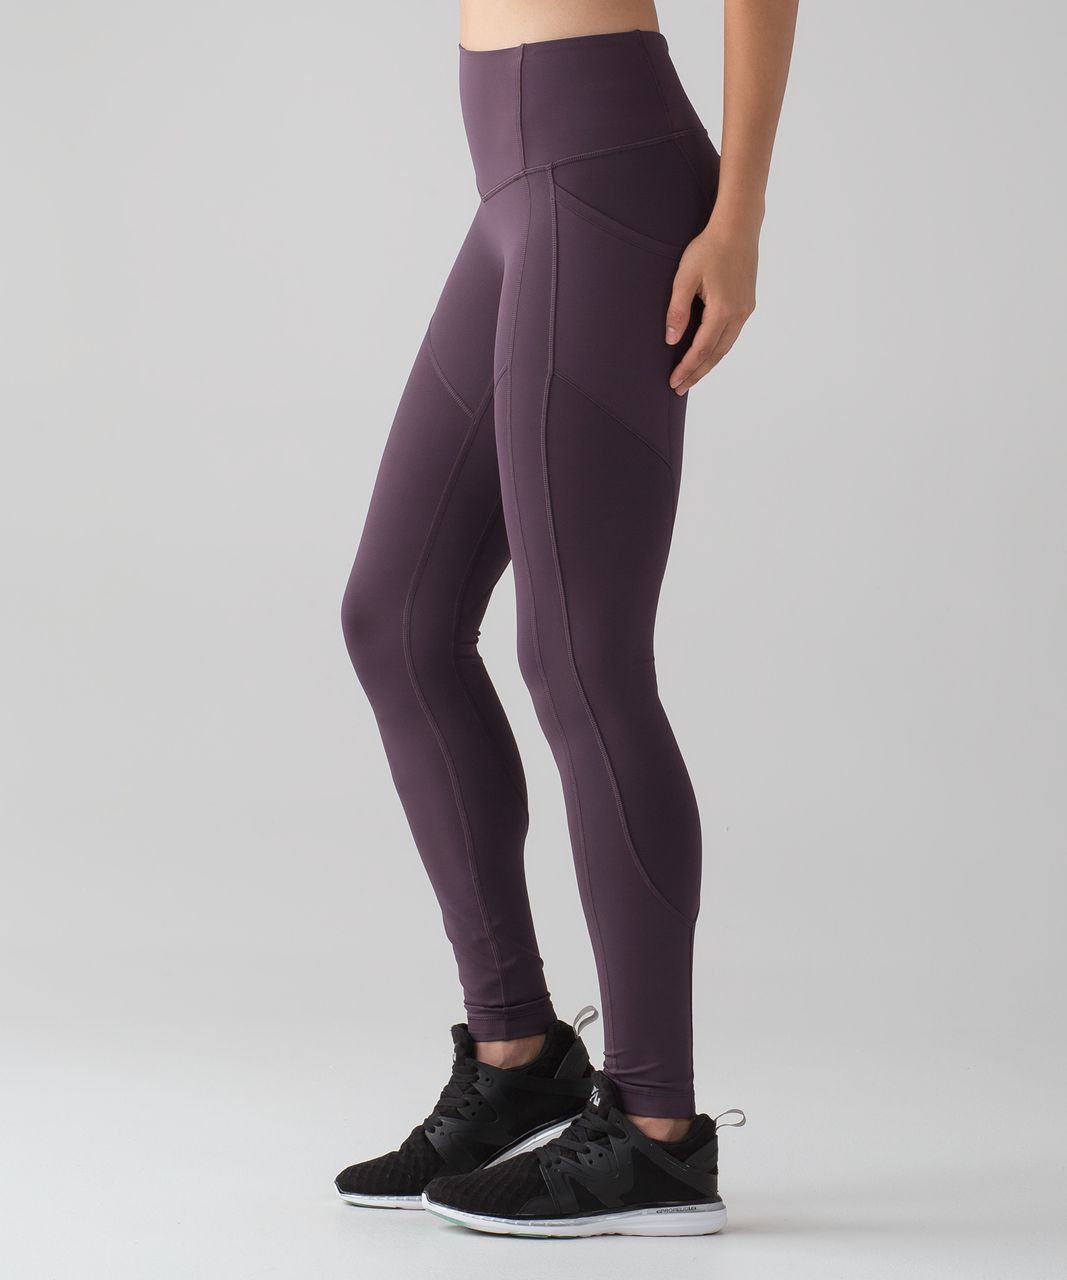 lululemon - 'All the Right Places' Tights (lulu size 4) on